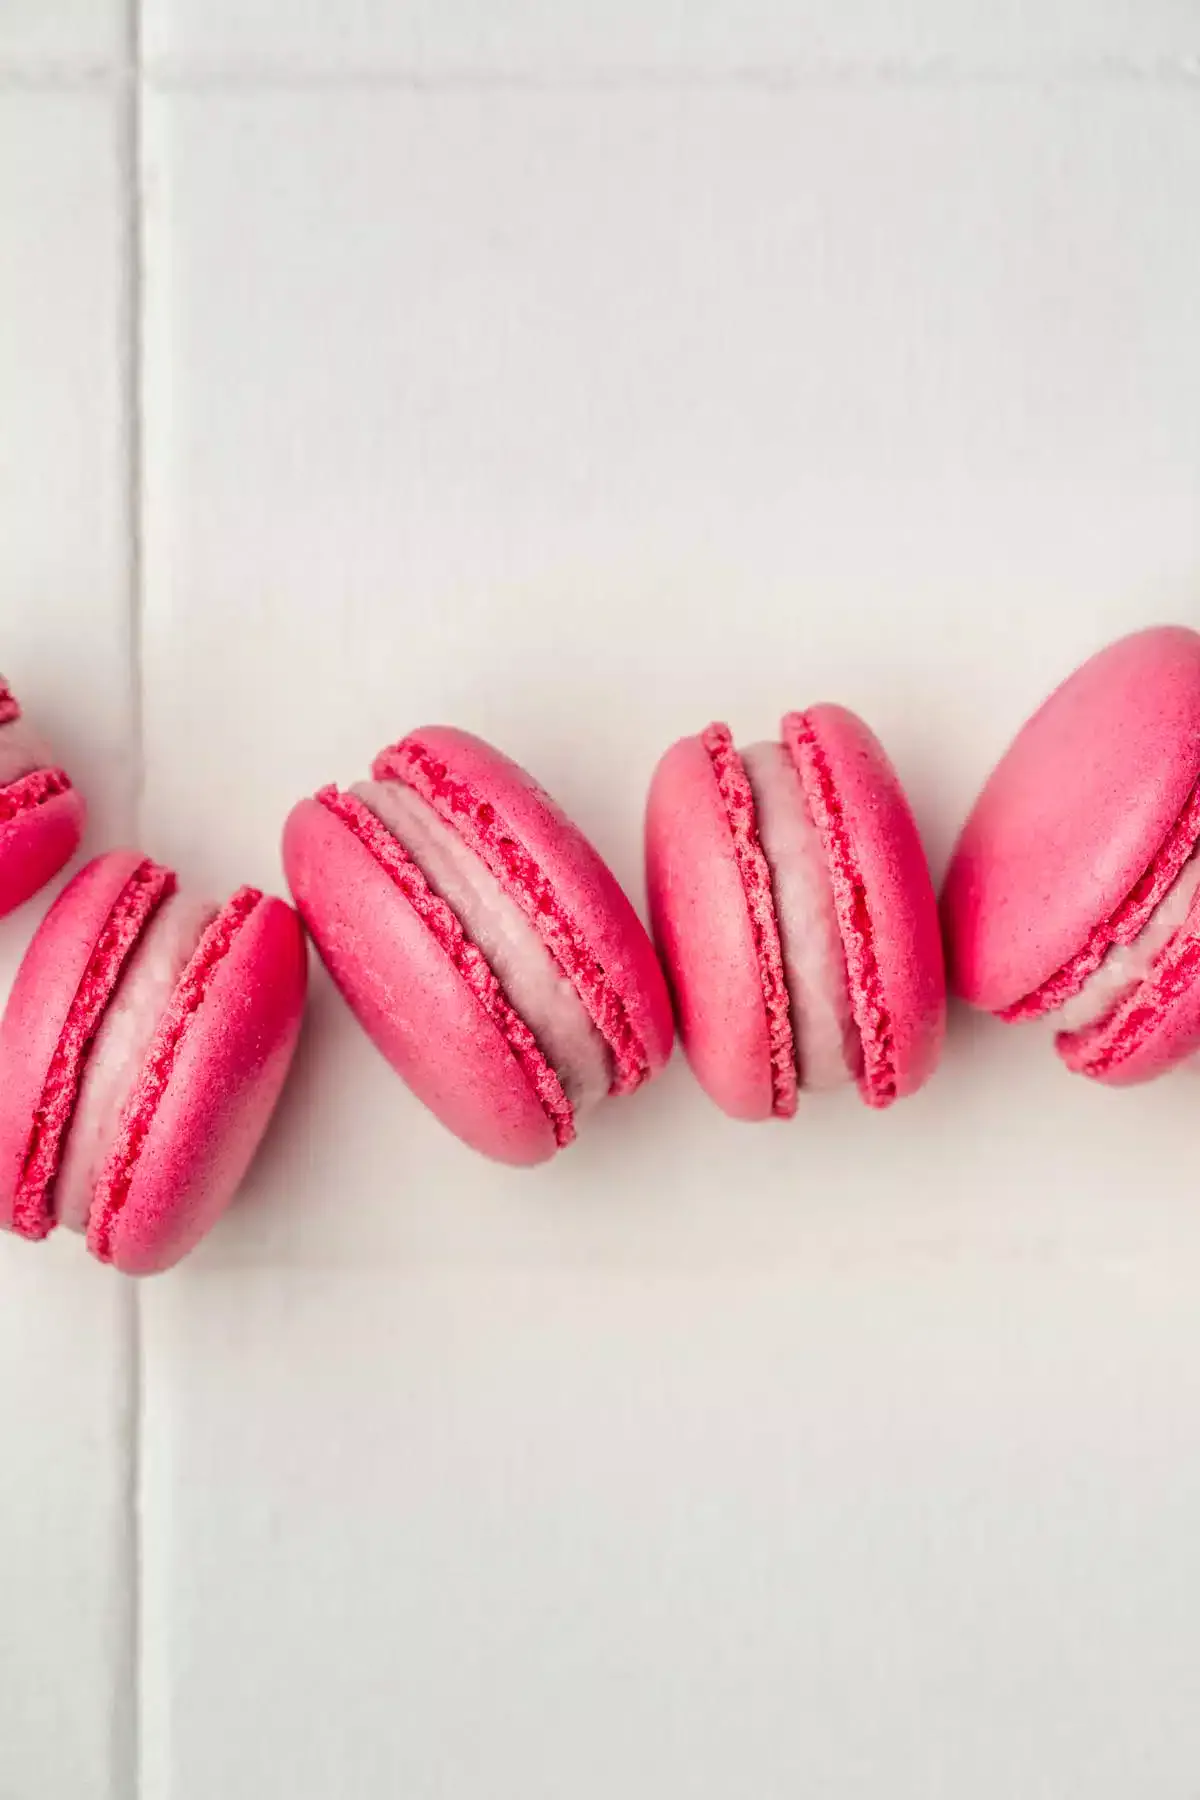 macarons rose framboise sur une table